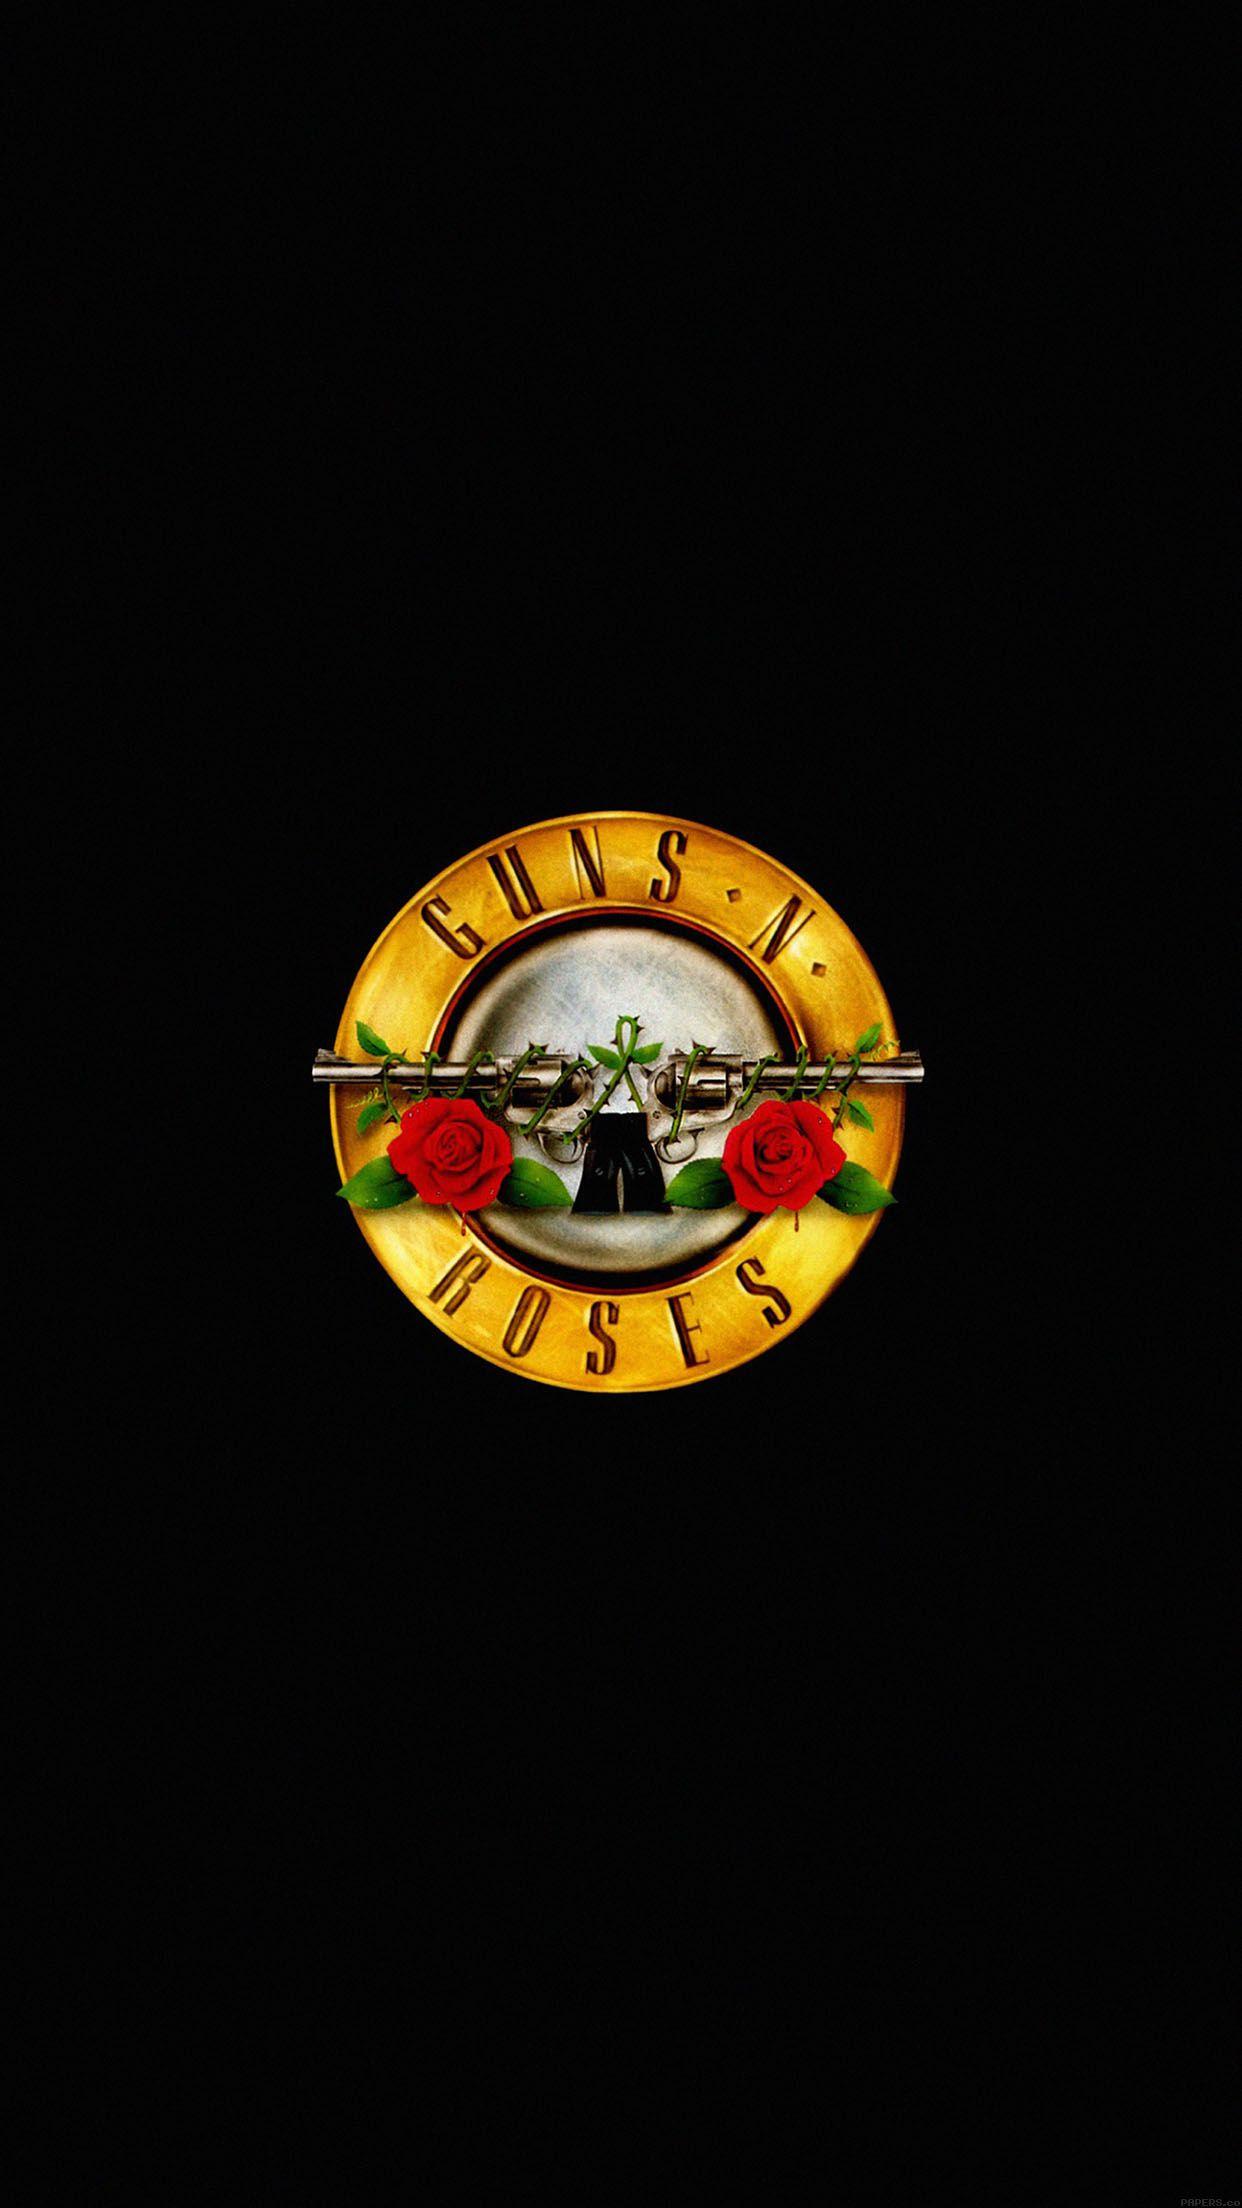 Pink Guns N' Roses Logo - PAPERS.co | iPhone wallpaper | ac74-wallpaper-guns-n-roses-logo ...